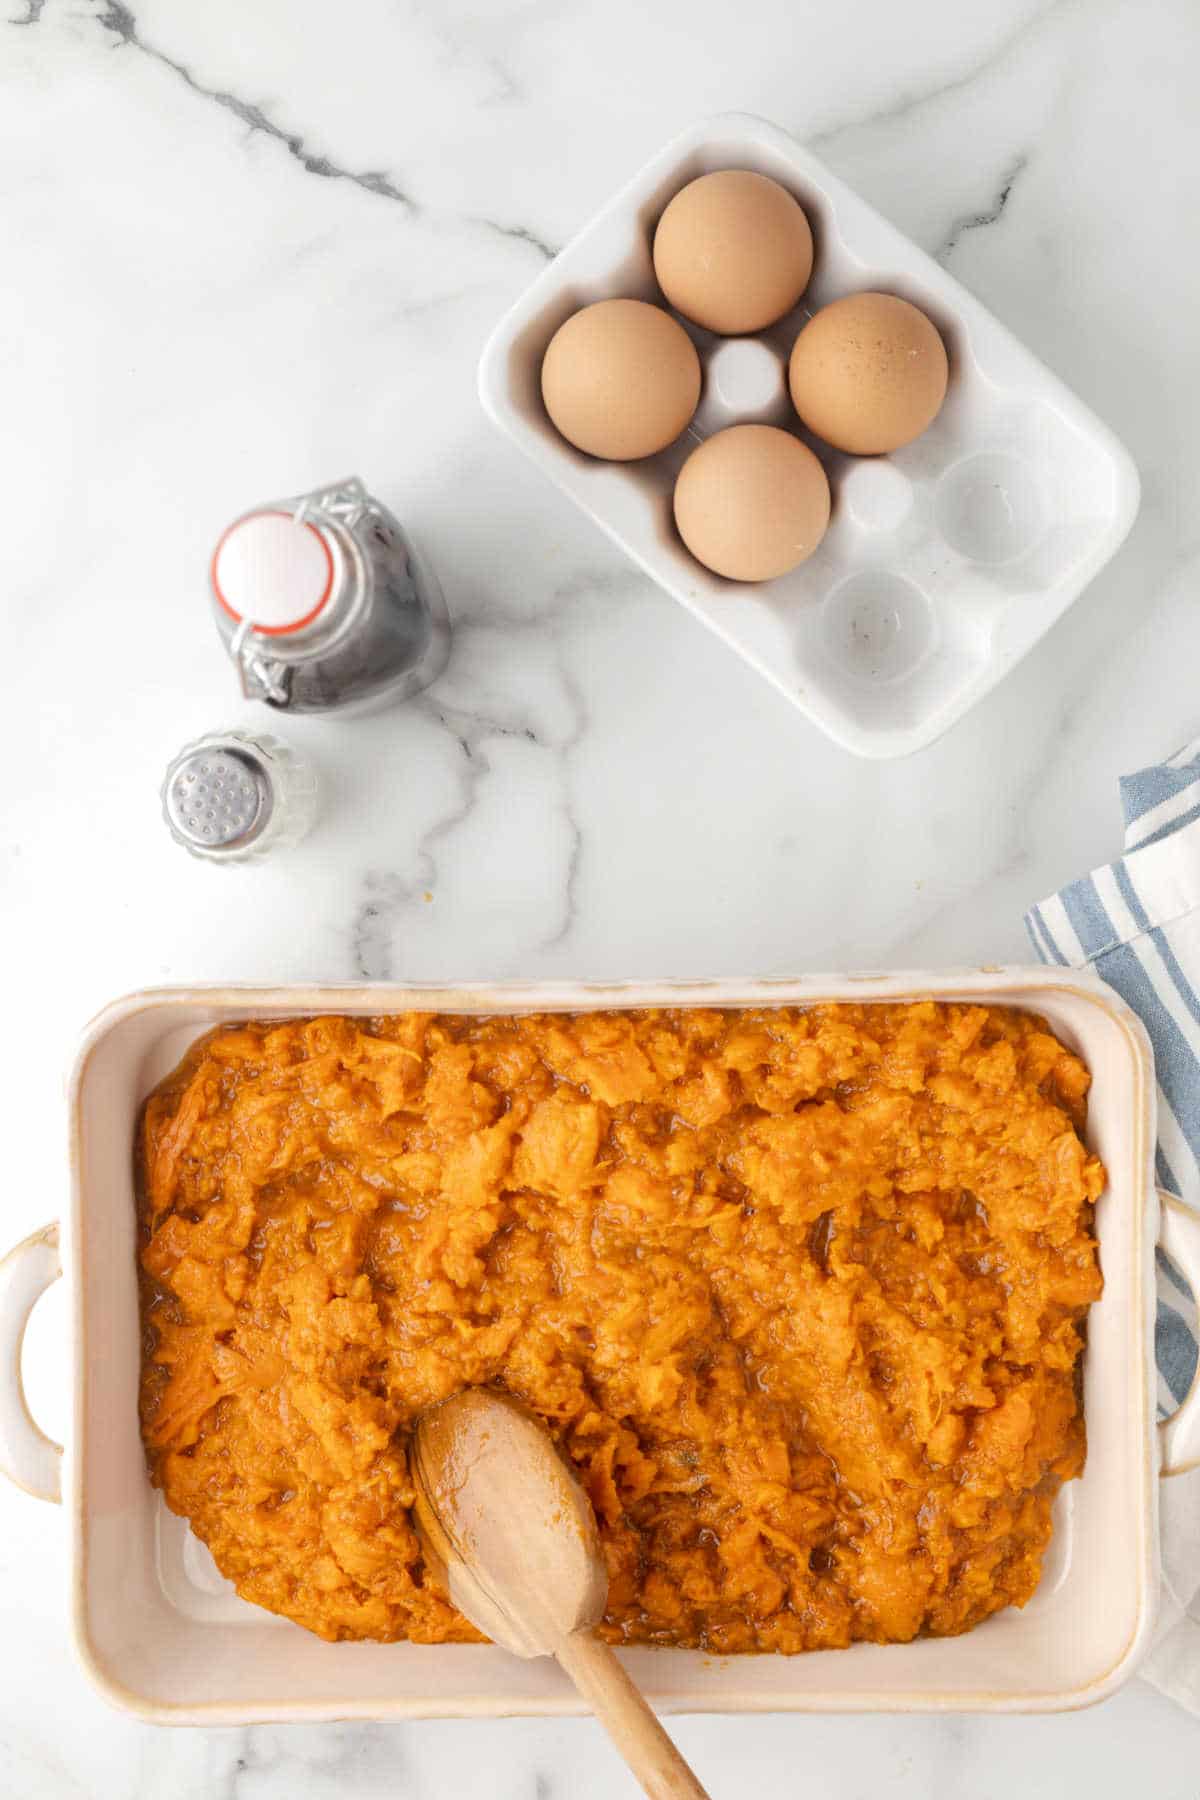 Wooden spoon spreading mashed sweet potato in a casserole dish.